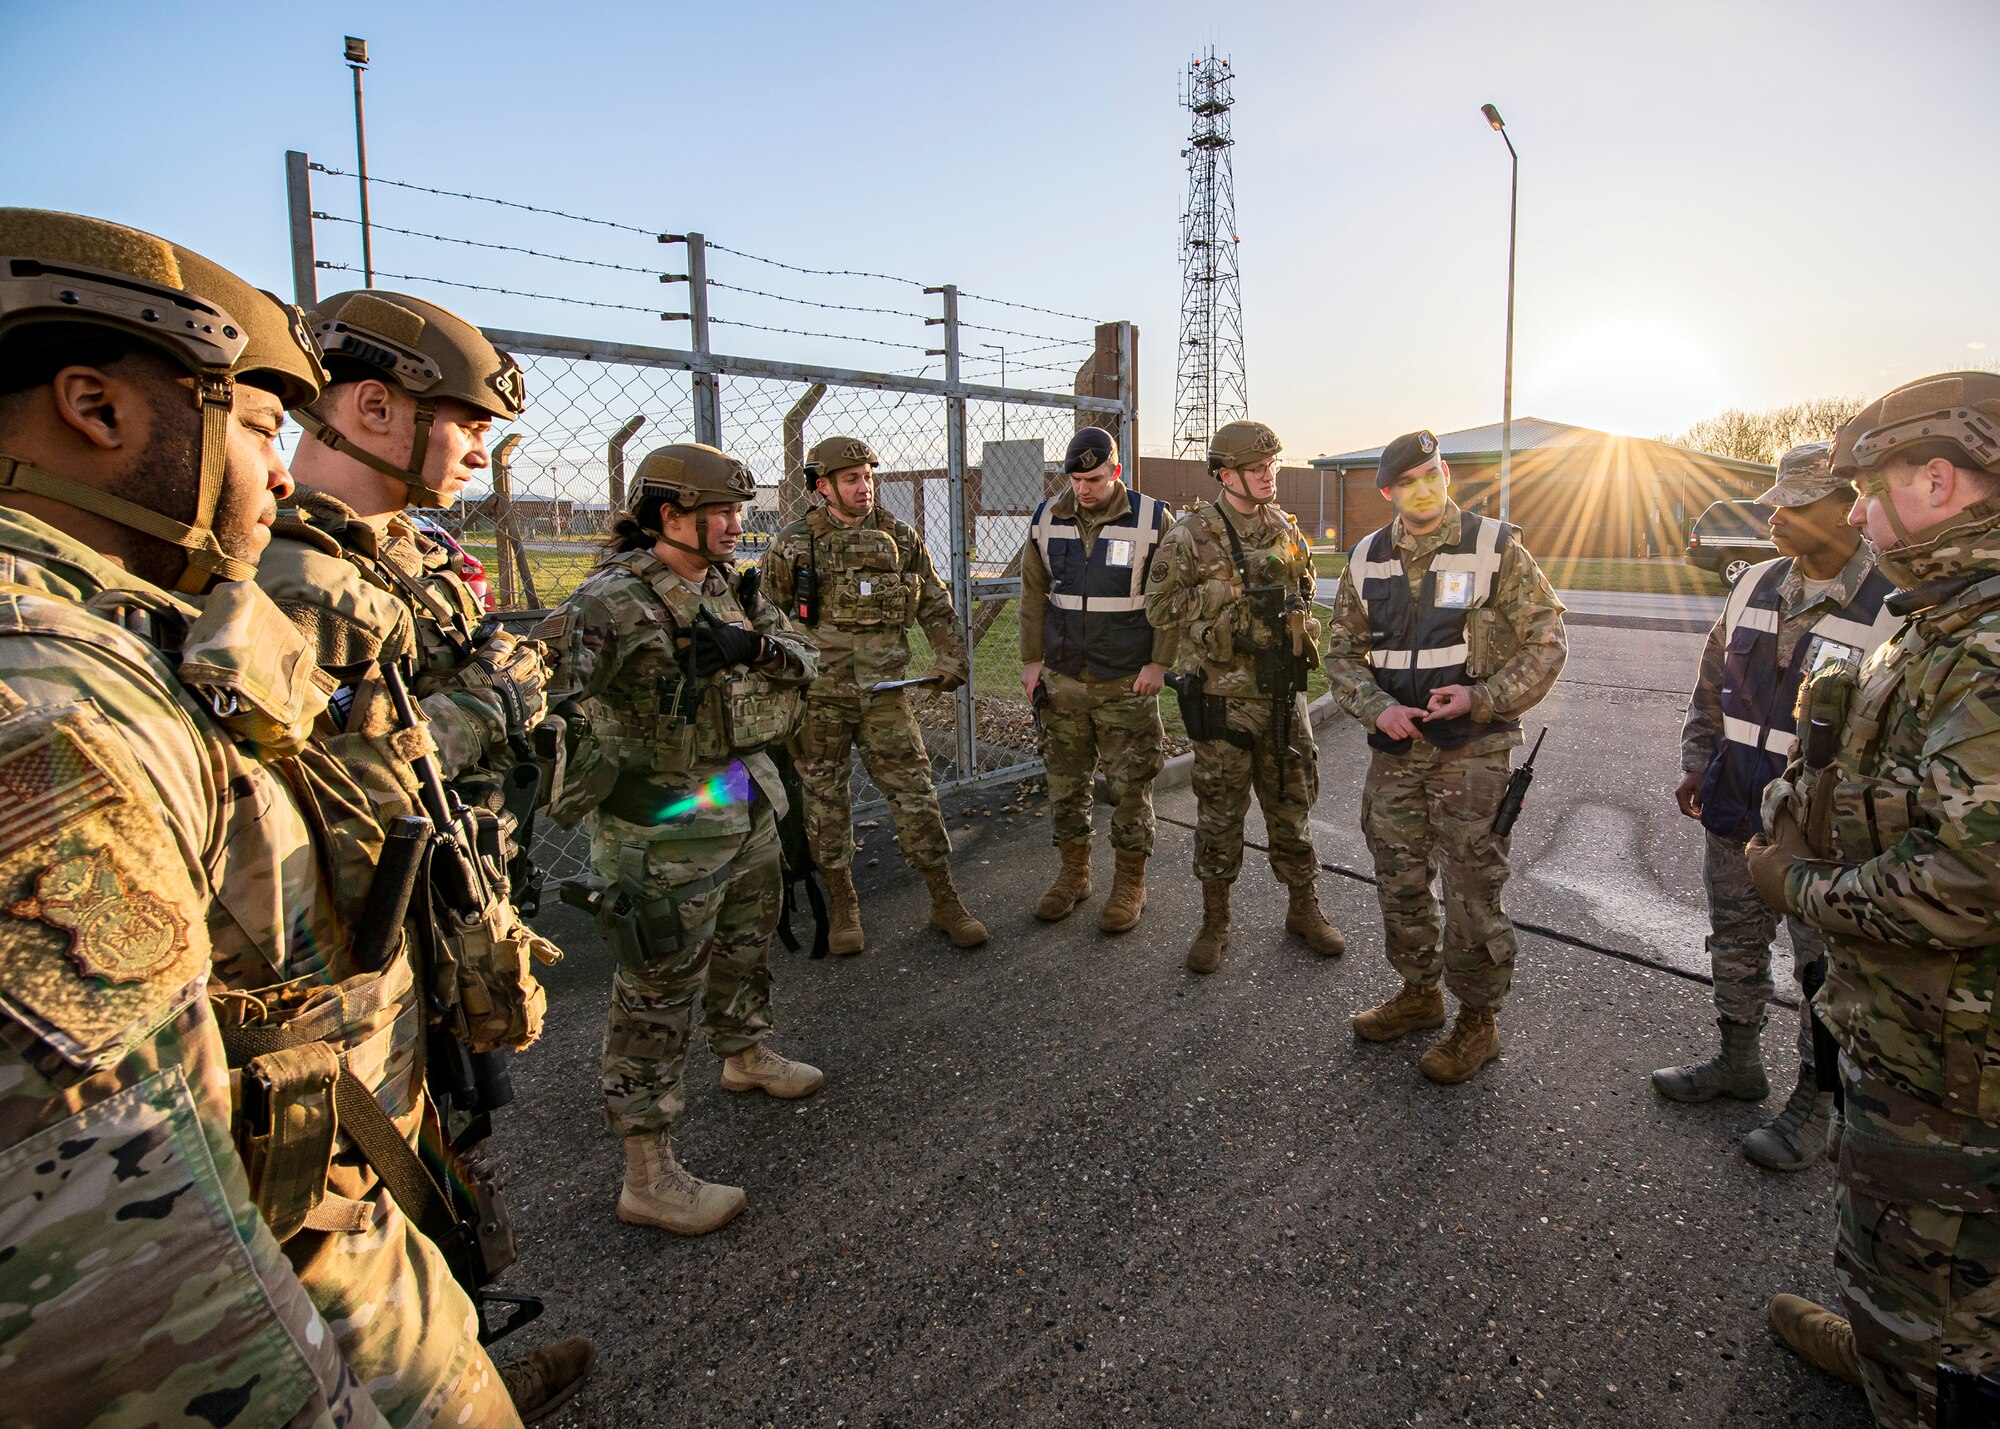 Master Sgt. Travis Beatty, (center right), 501st Combat Support Wing director of exercises for the Inspector General, speaks with Airmen from the 423 Security Forces Squadron about their performance following a readiness exercise, at RAF Molesworth, England, Feb. 11, 2020.  The exercise tested the wing’s preparedness and response capabilities to an emergency situation. (U.S. Air Force photo by Senior Airman Eugene Oliver)